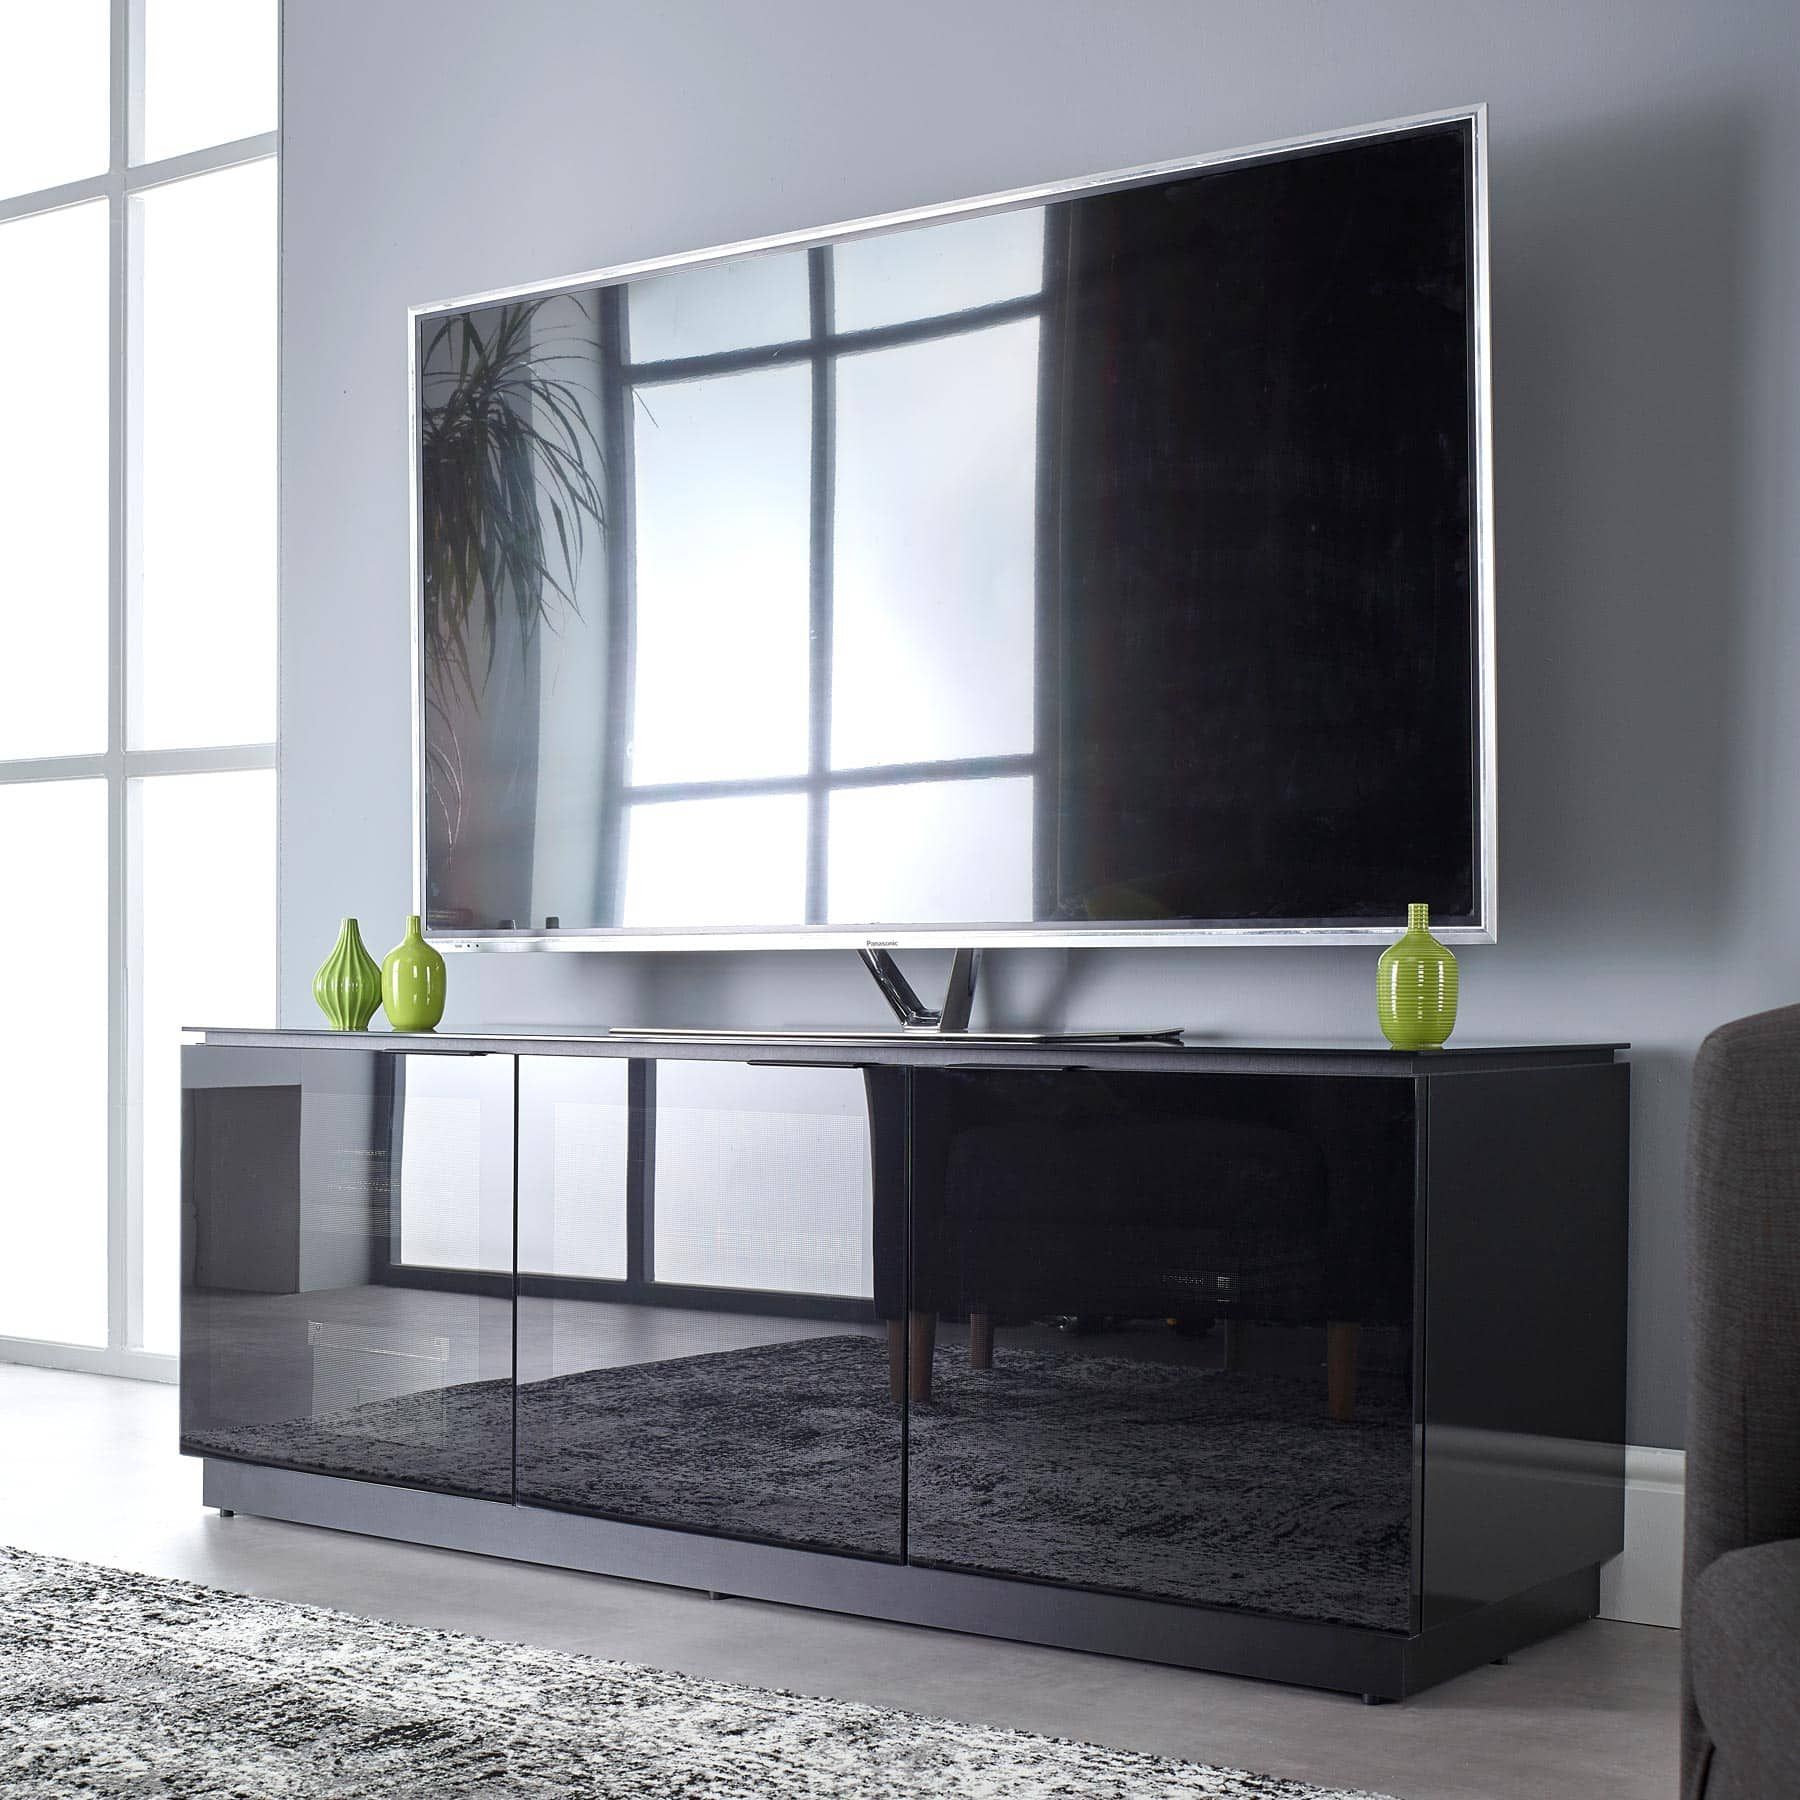 Black Gloss Tv Stand Up To 65 Inch Flat Tv | Mmt D1500 In Black Gloss Tv Stand (View 8 of 15)